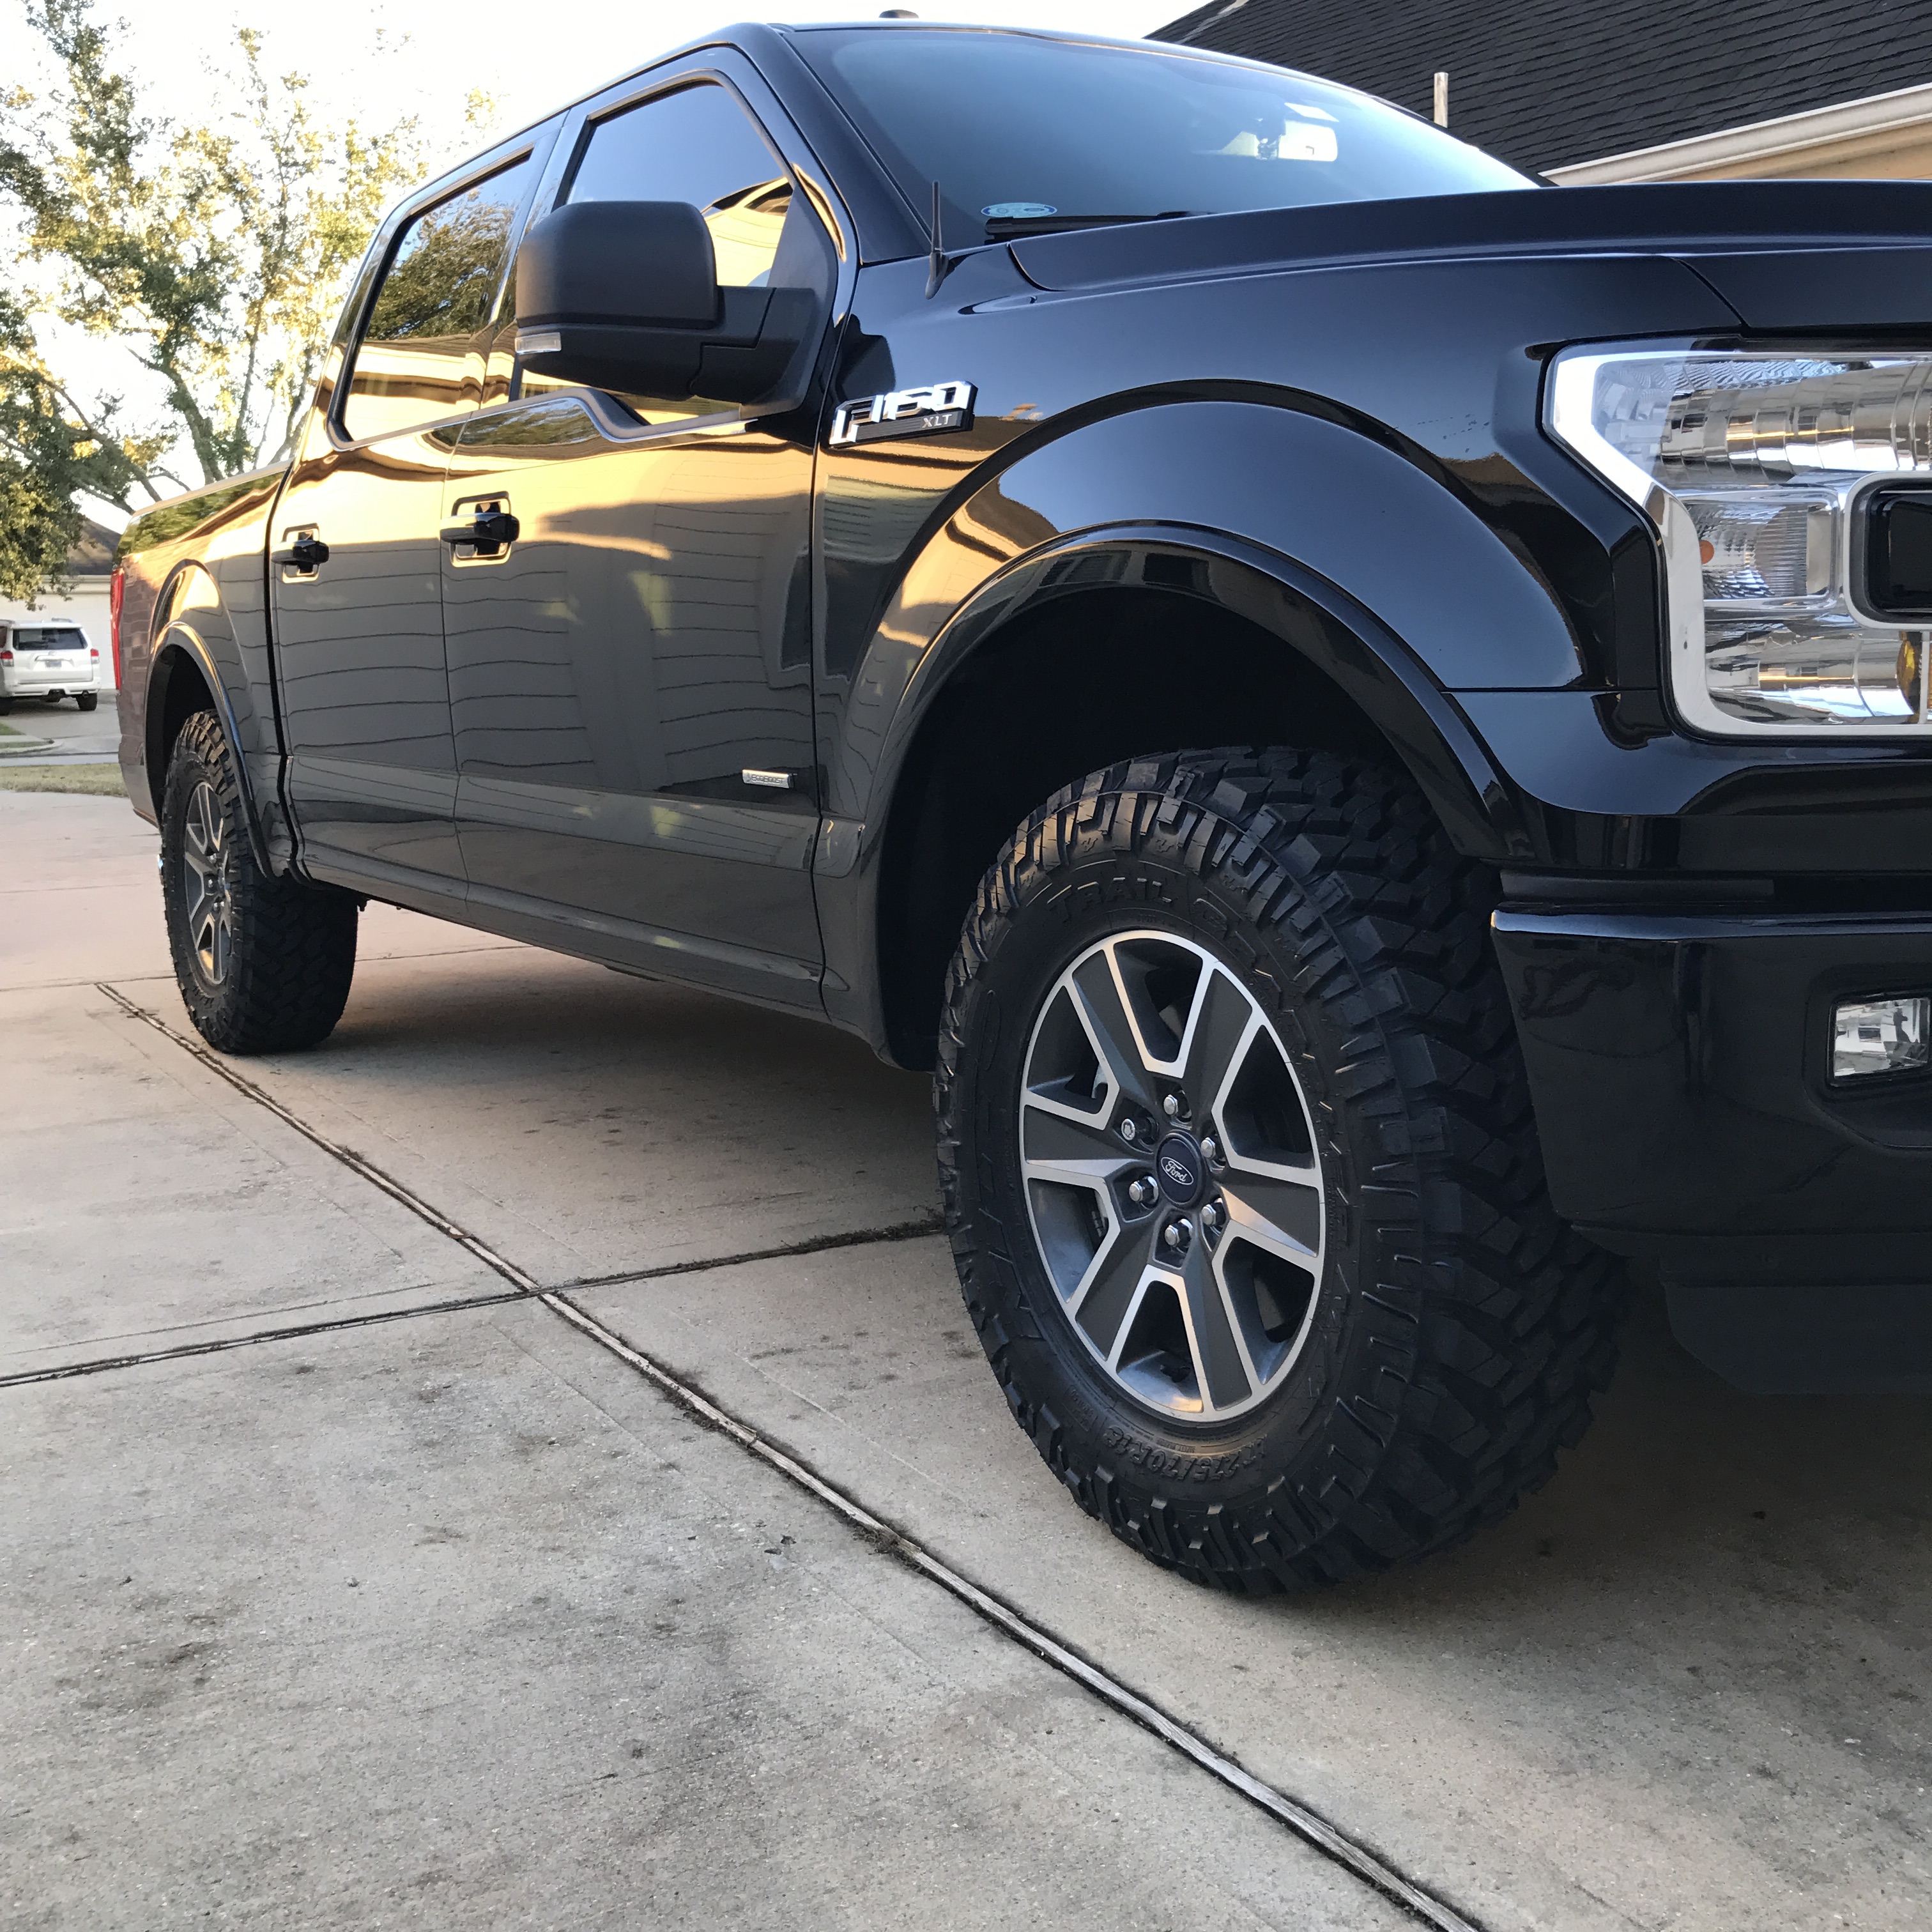 Unexpectedly Got 275 70r18 Bfg Ko2 S Today At Lunch Ford F150 Forum Community Of Ford Truck Fans